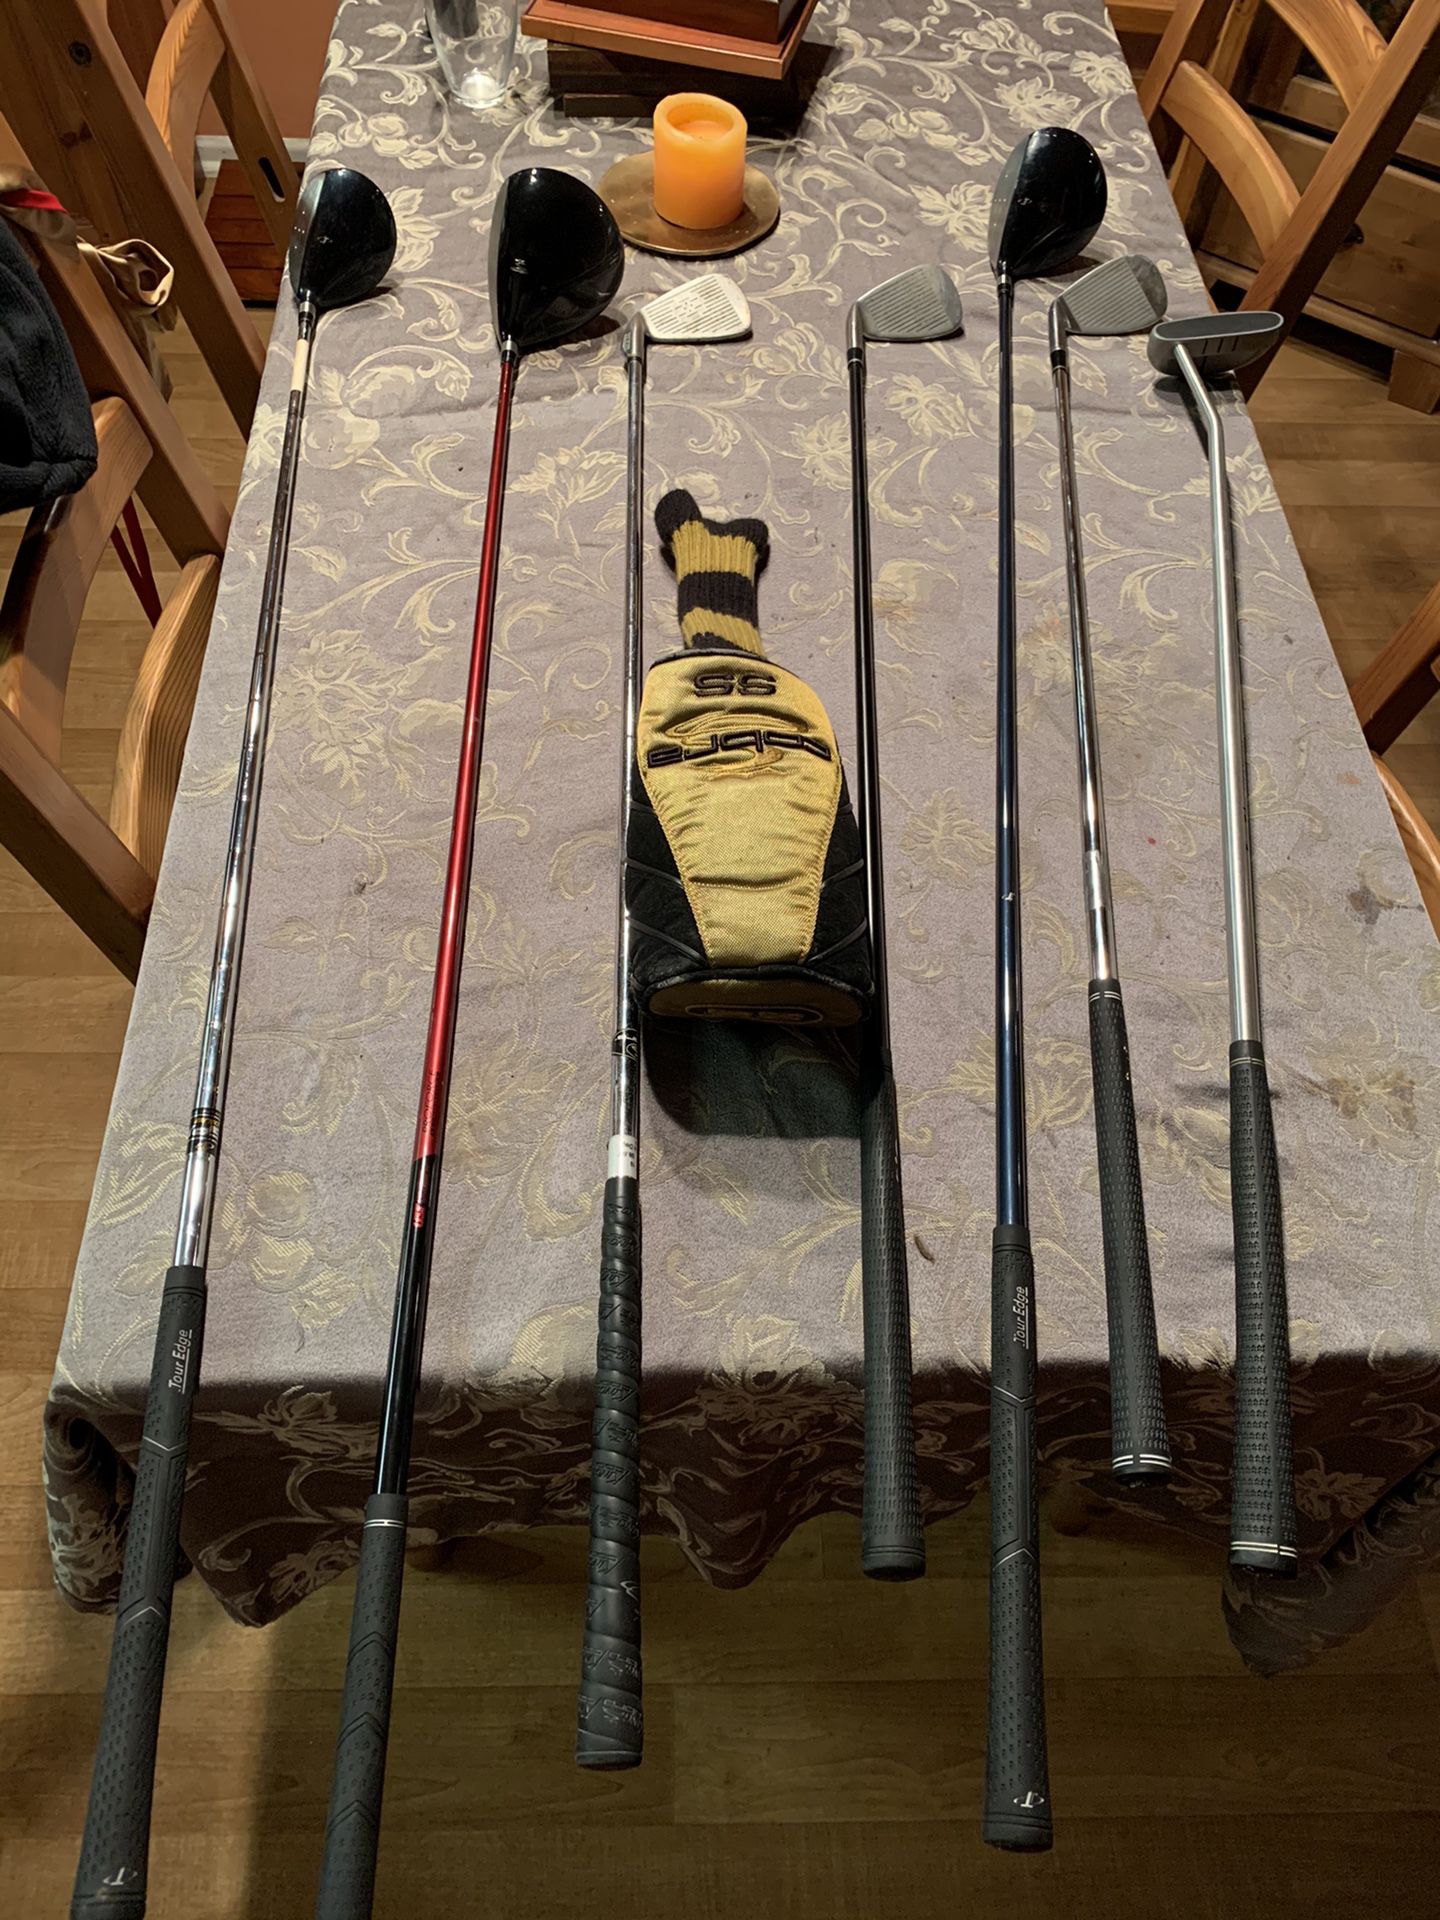 Set of Clubs with the carry - golf bag . All clubs and the bag are in good shape. like new